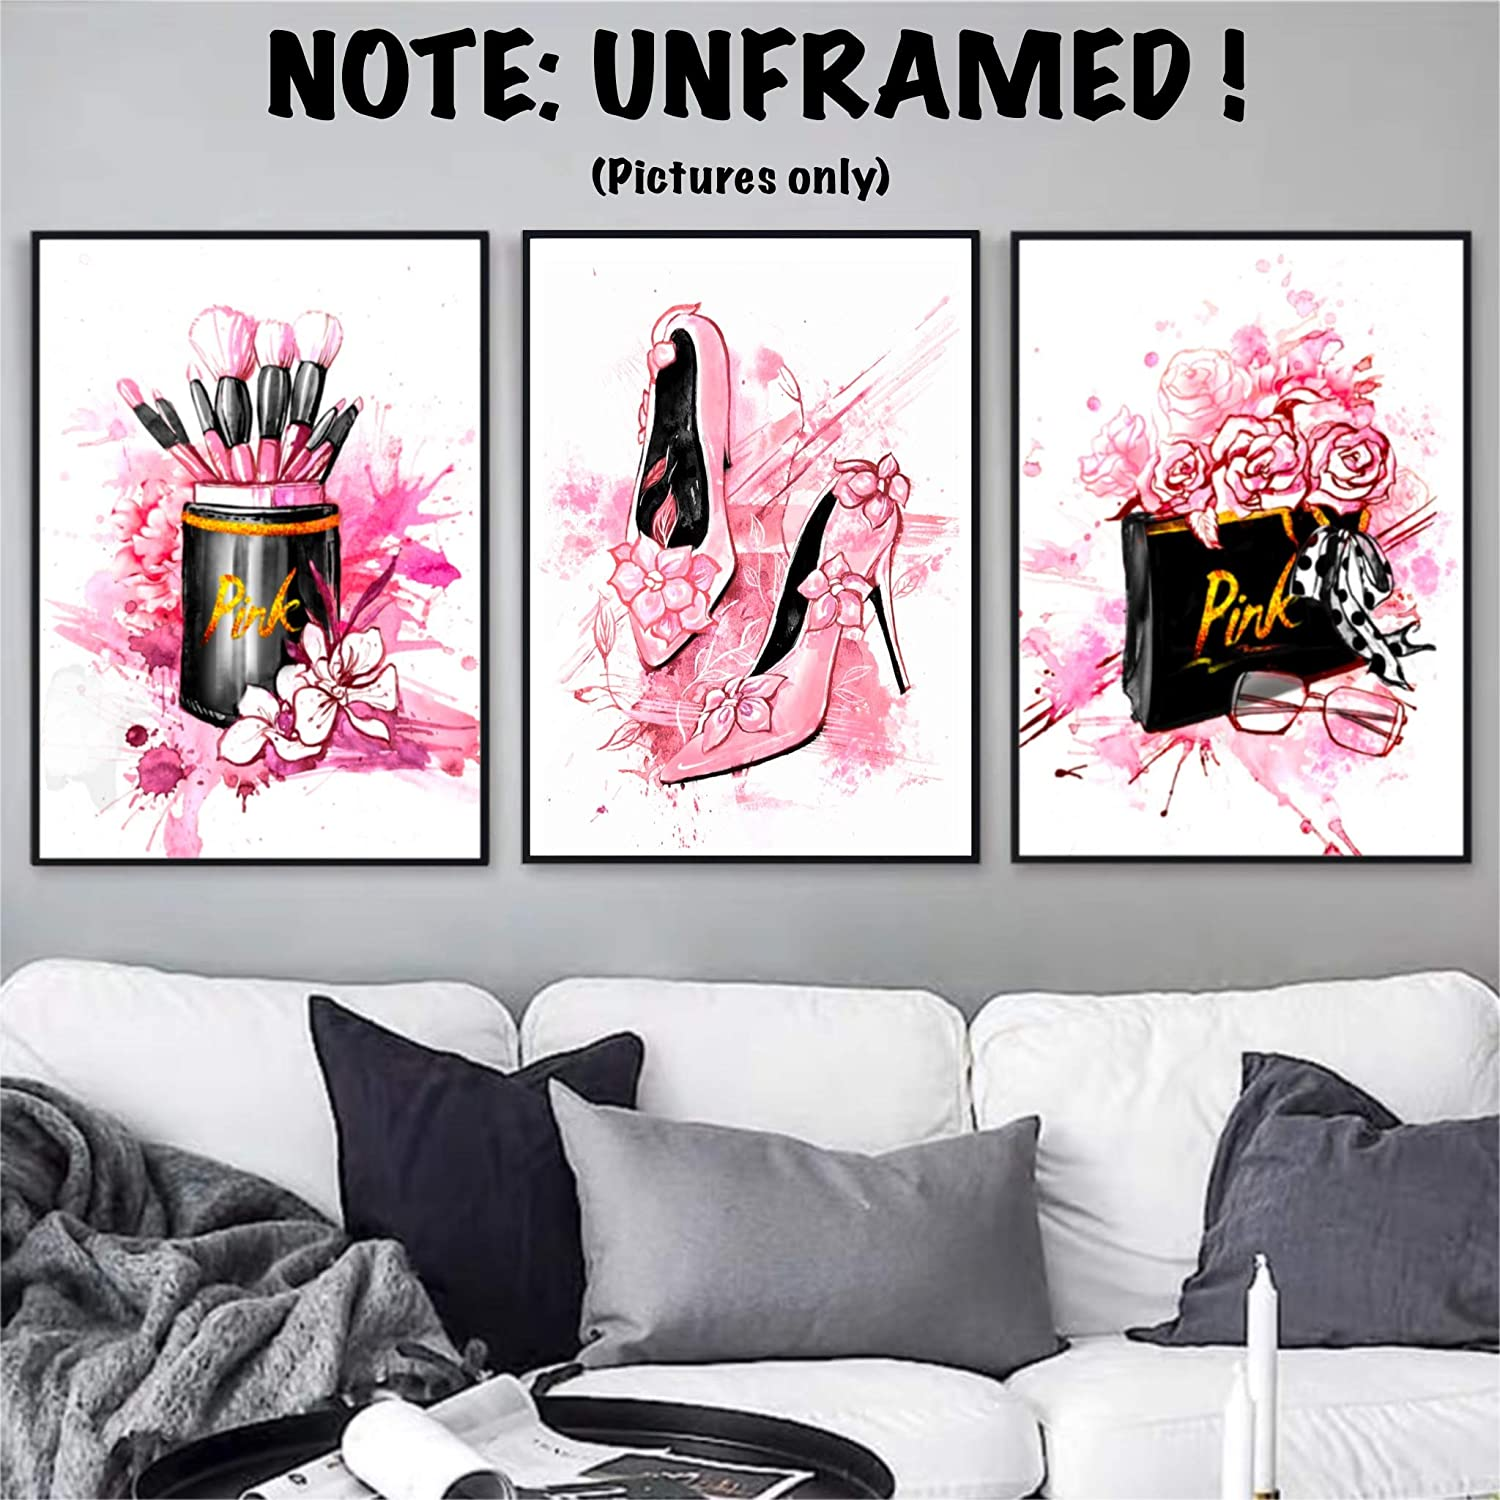 Fashion Poster Modern Luxury Posters Women Walls Canvas Pink Flowers Wall Deco Designer Shoes Perfume Handbags - Pink Glamour Wall Art Gifts for